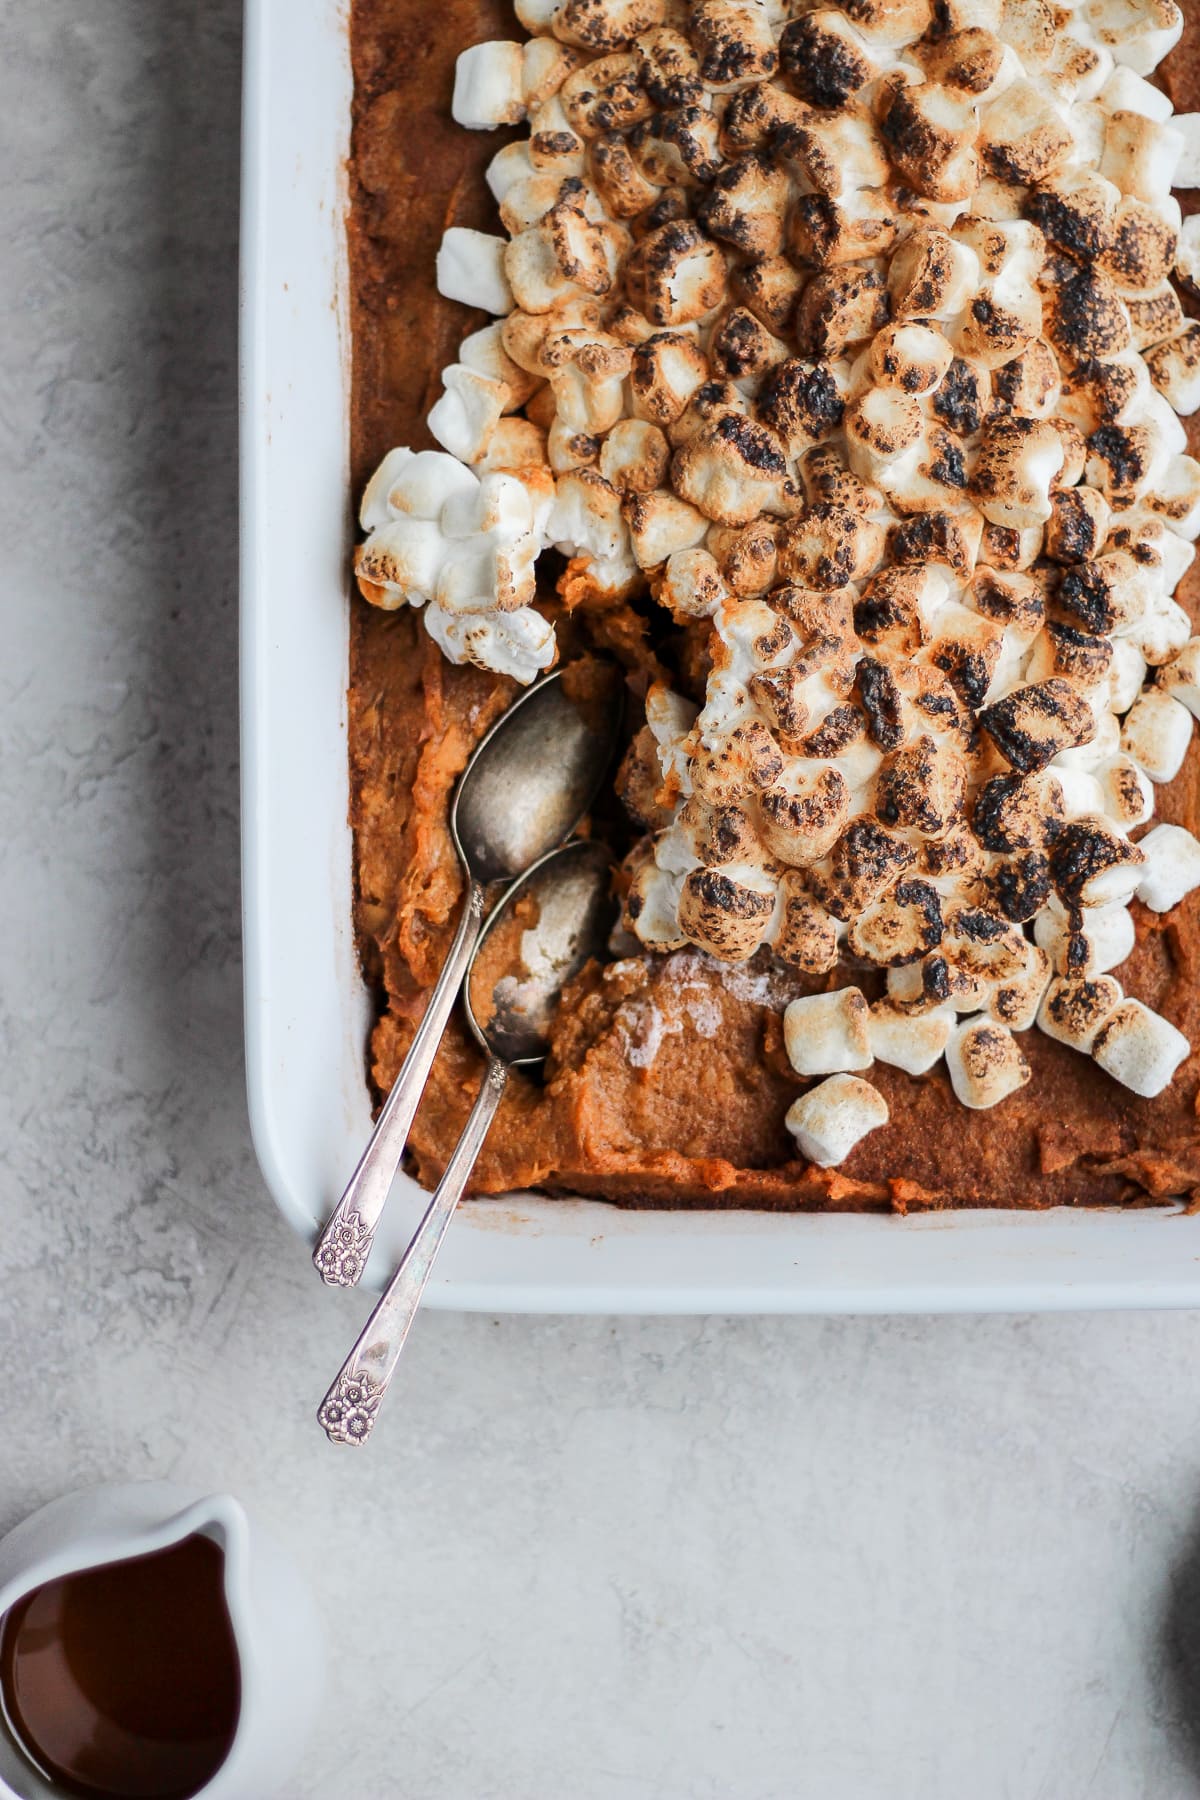 Two spoons in the sweet potato casserole after baking.